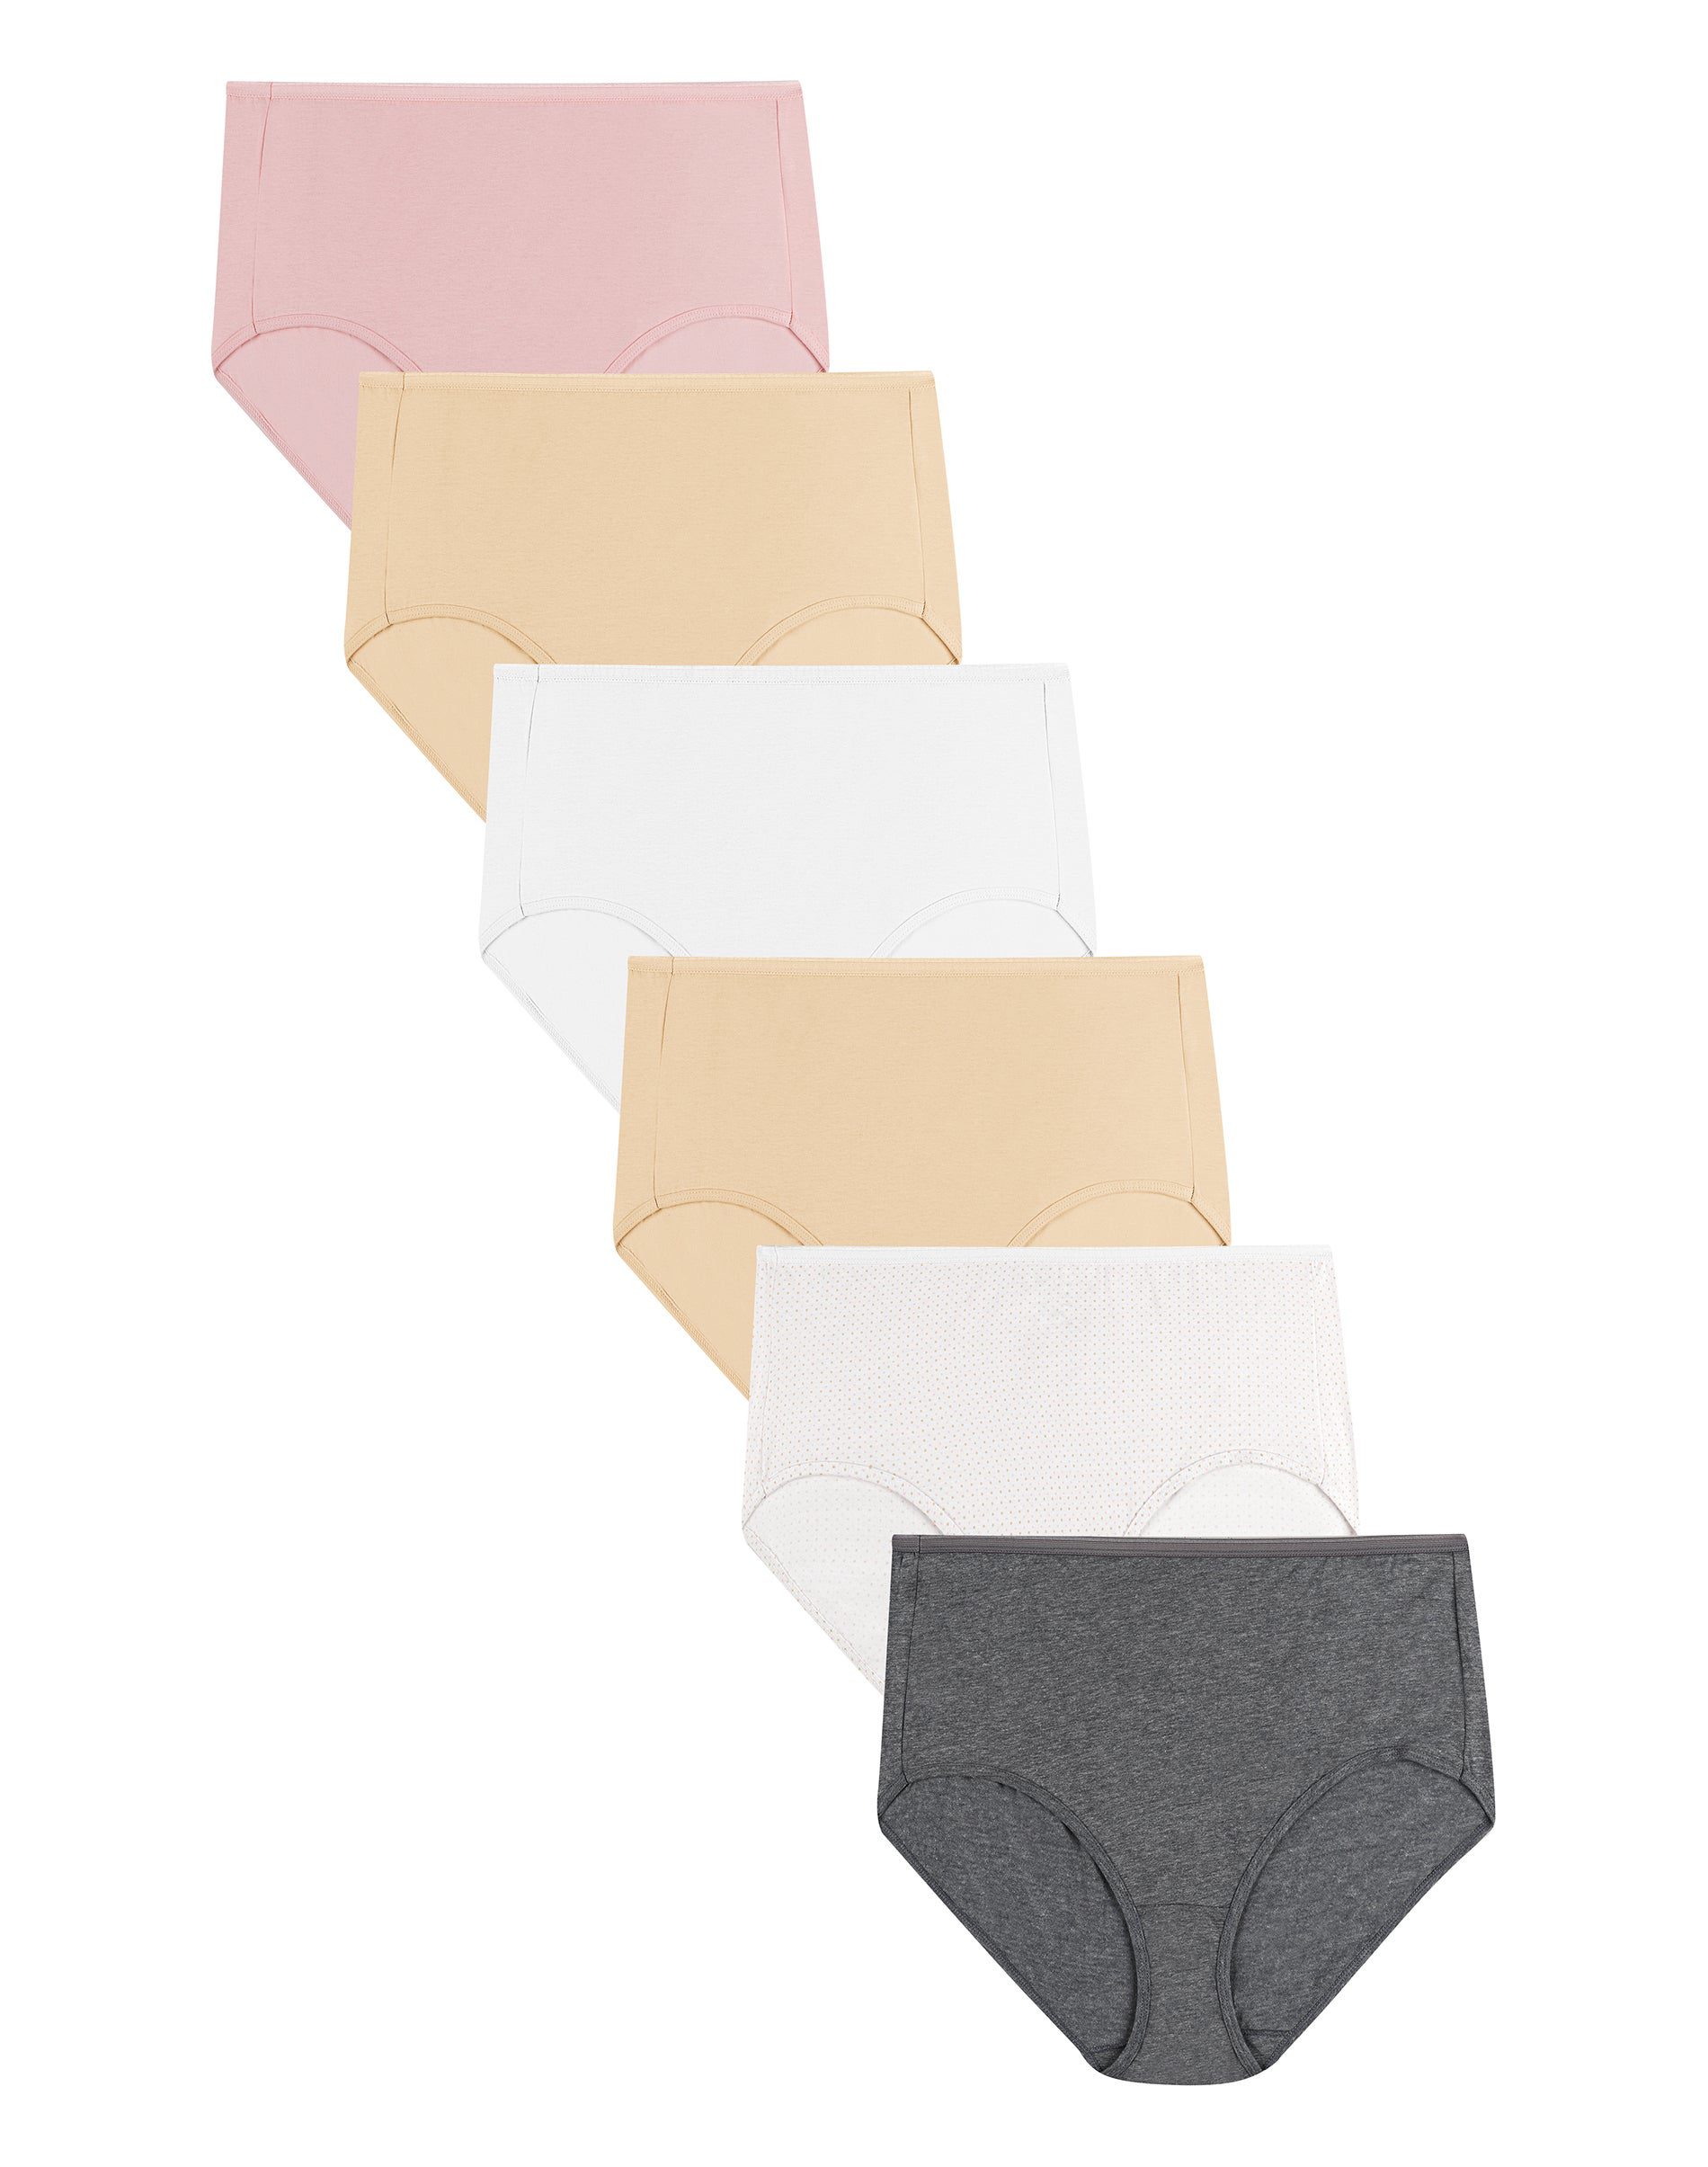 JMS by Hanes Womens Cotton High Briefs Assorted, 6-Pack - Apparel